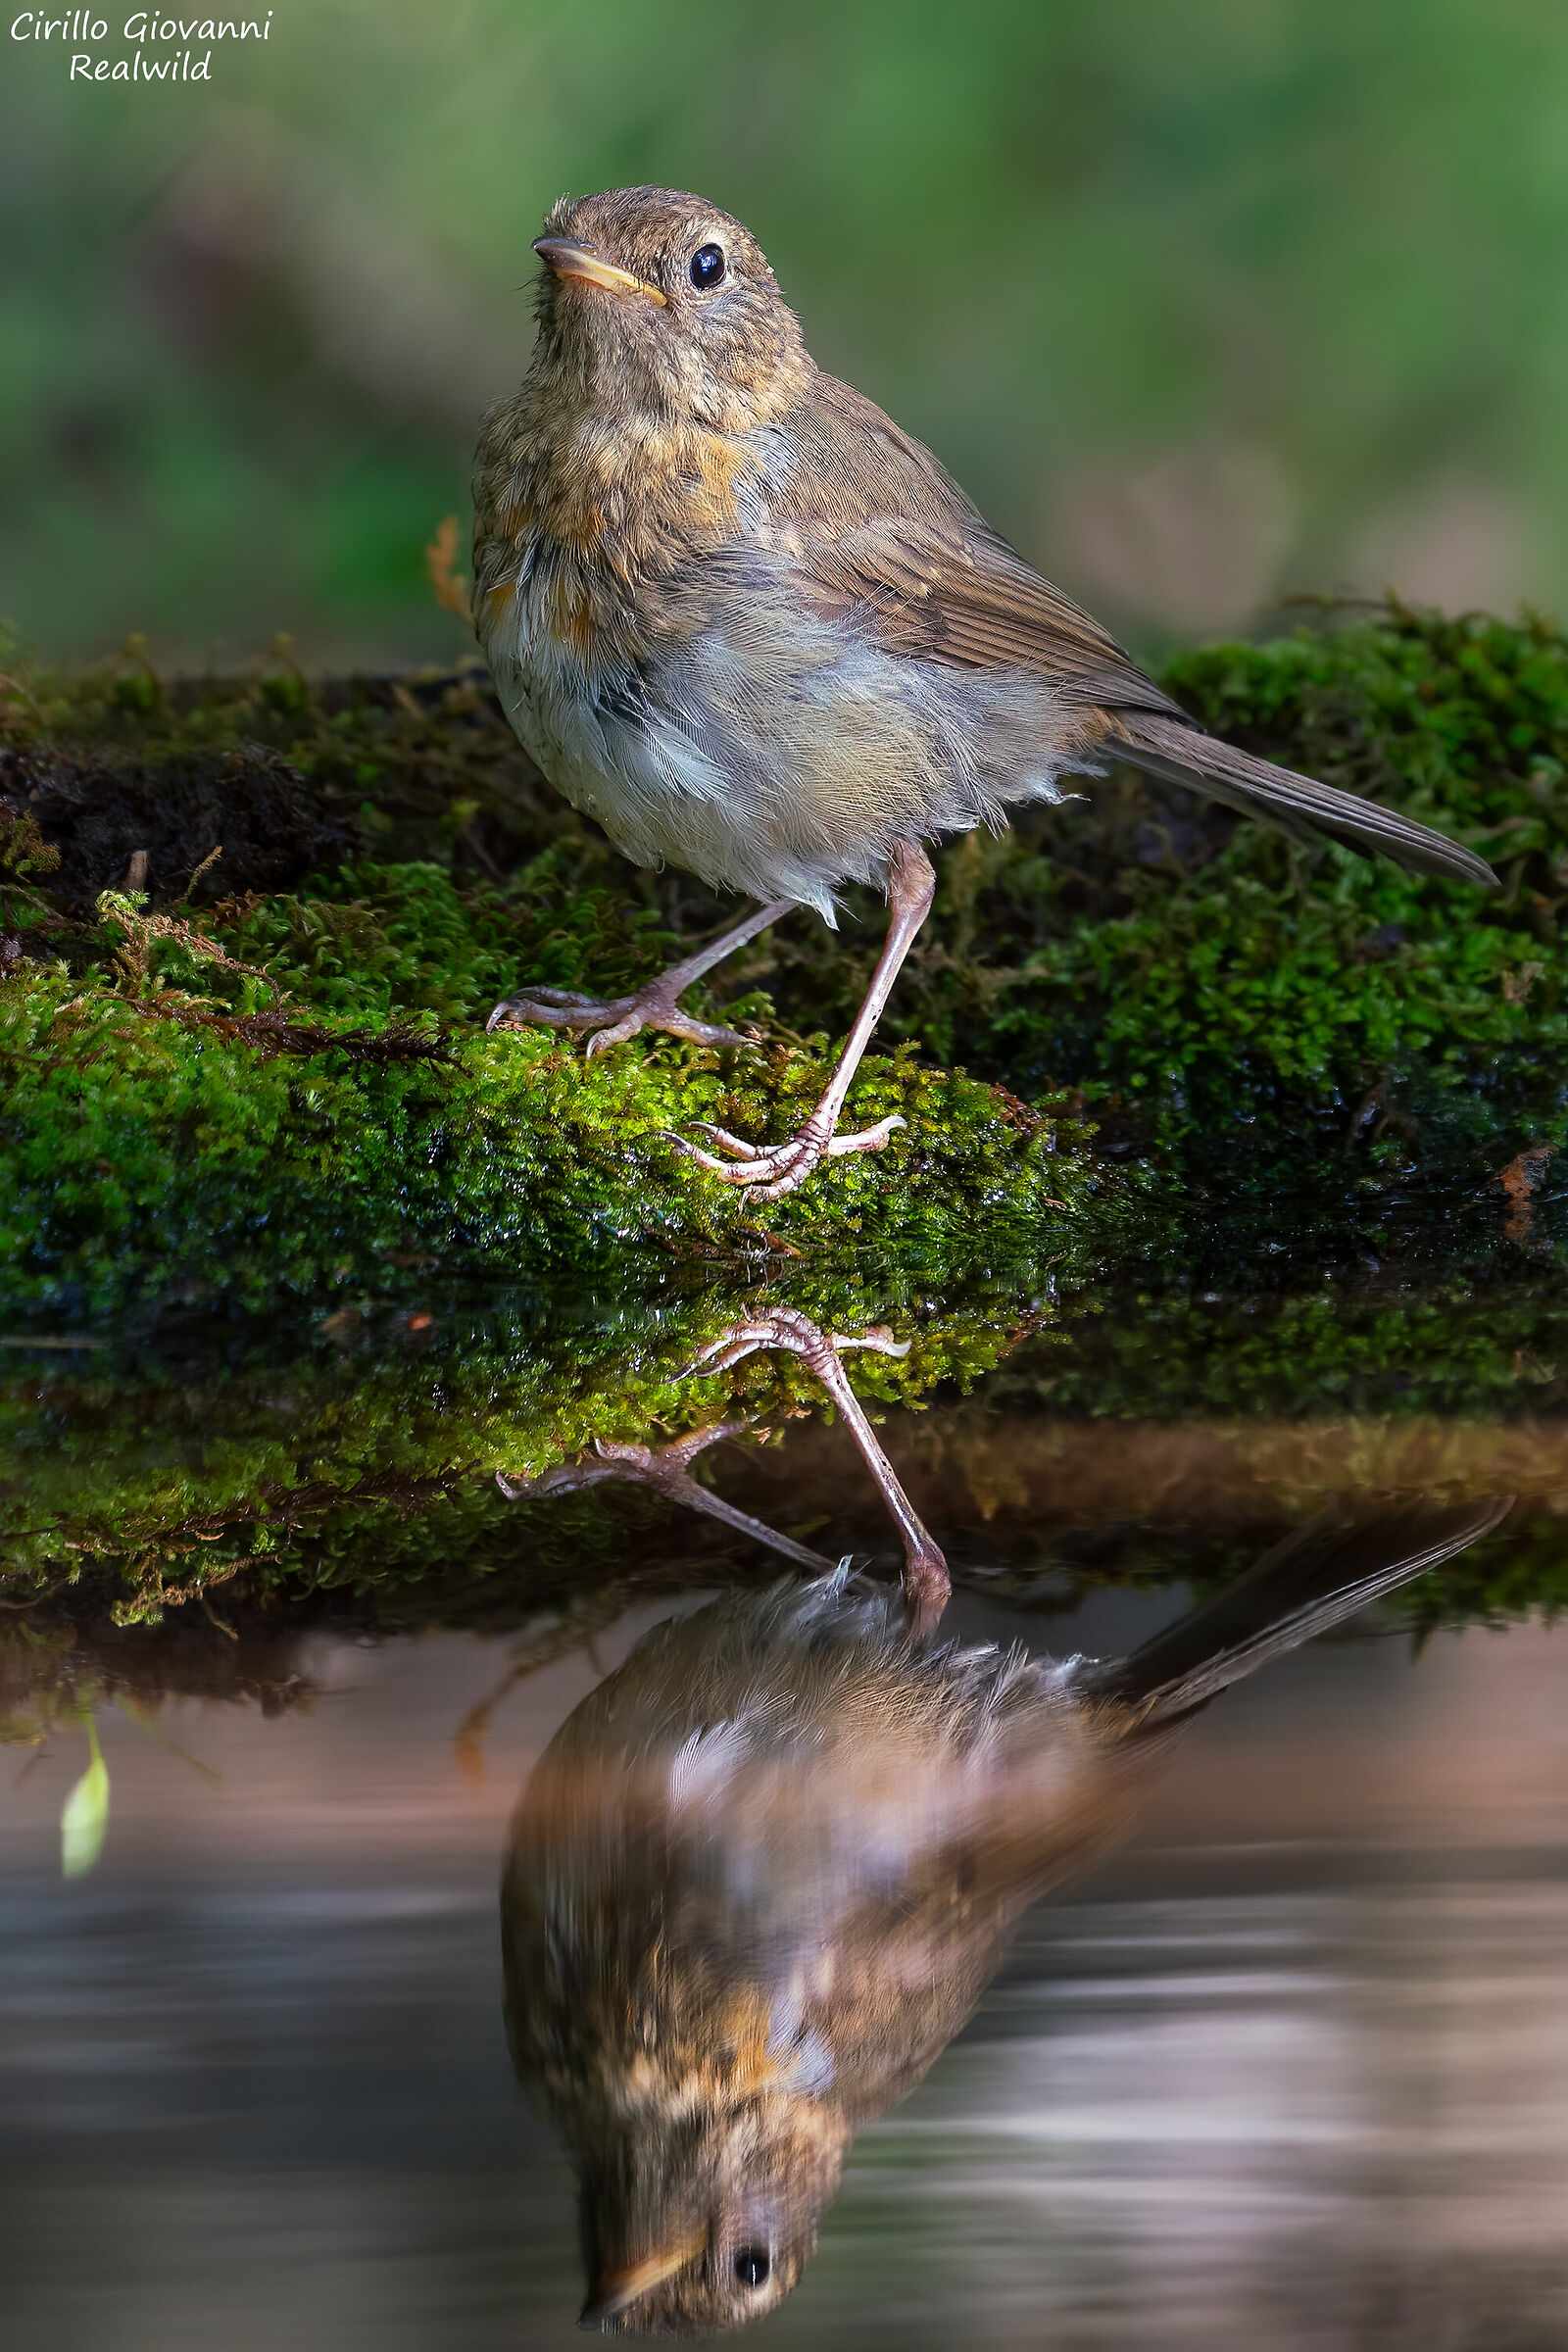 The Young Robin in the Mirror ...